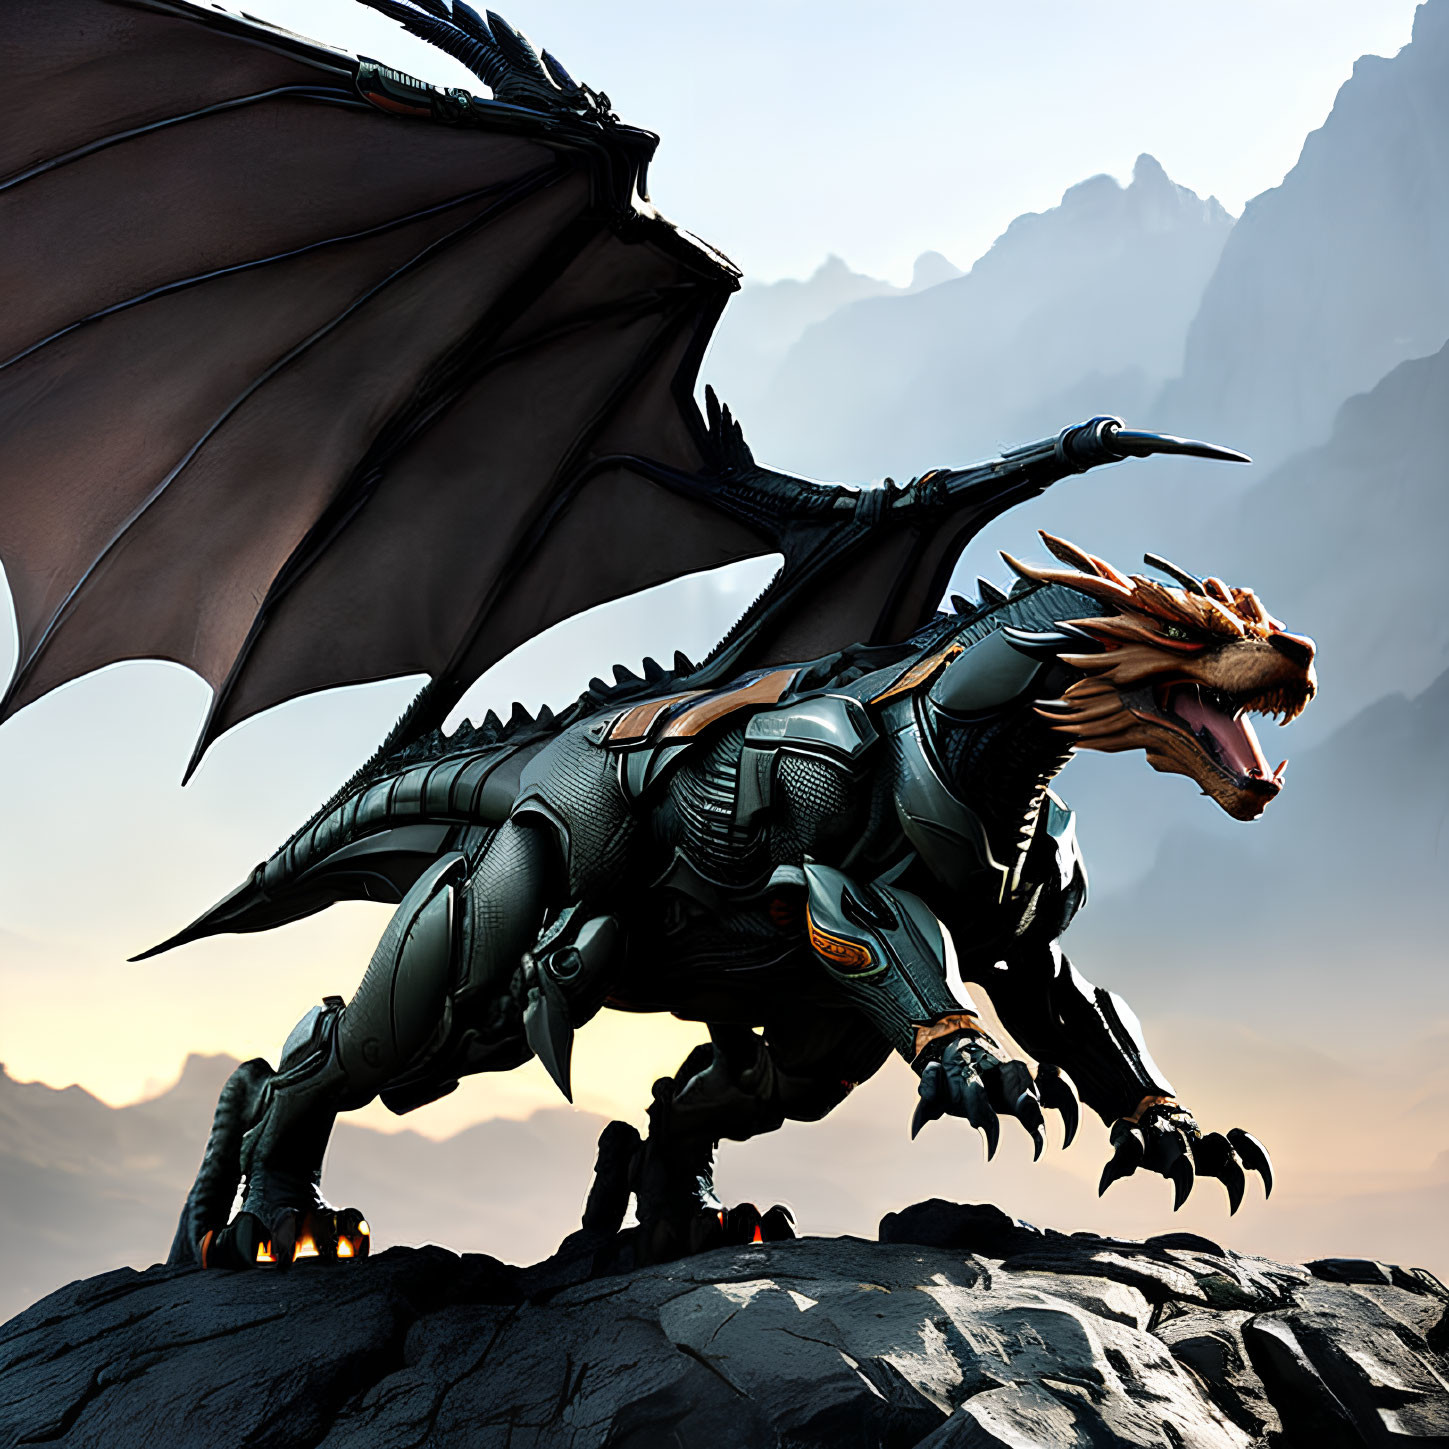 Black dragon with orange underlighting perched on rocky outcrop against misty mountains